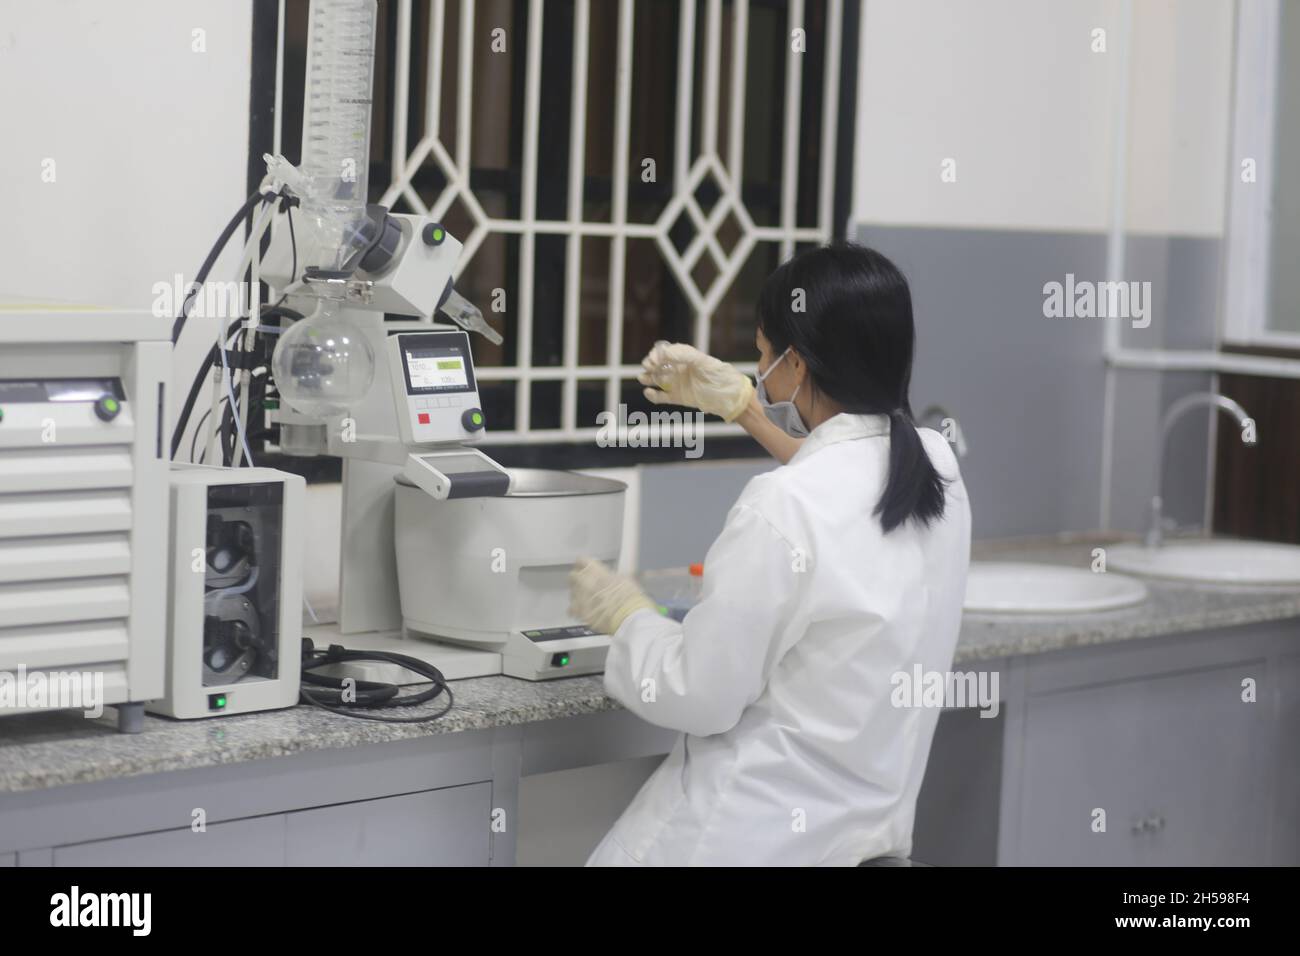 Asian woman scientist operating a rotary evaporator to make an experiment in the laboratory Stock Photo